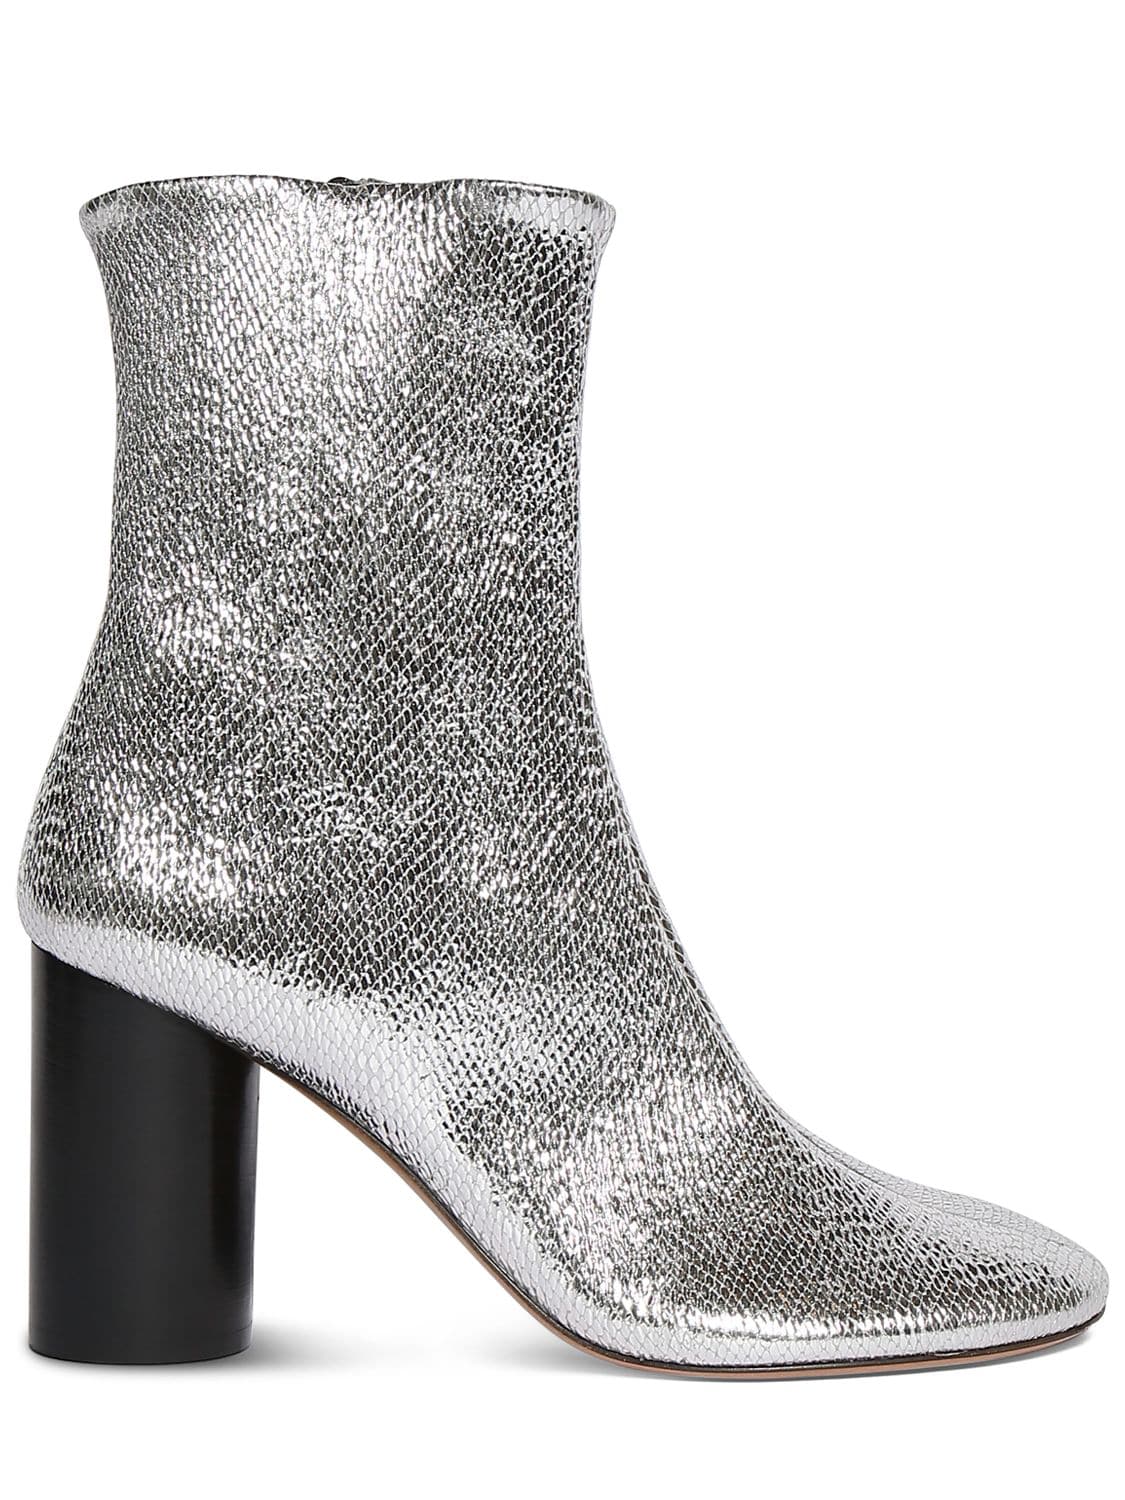 Isabel Marant 85mm Labee Metallic Leather Boots In Silver